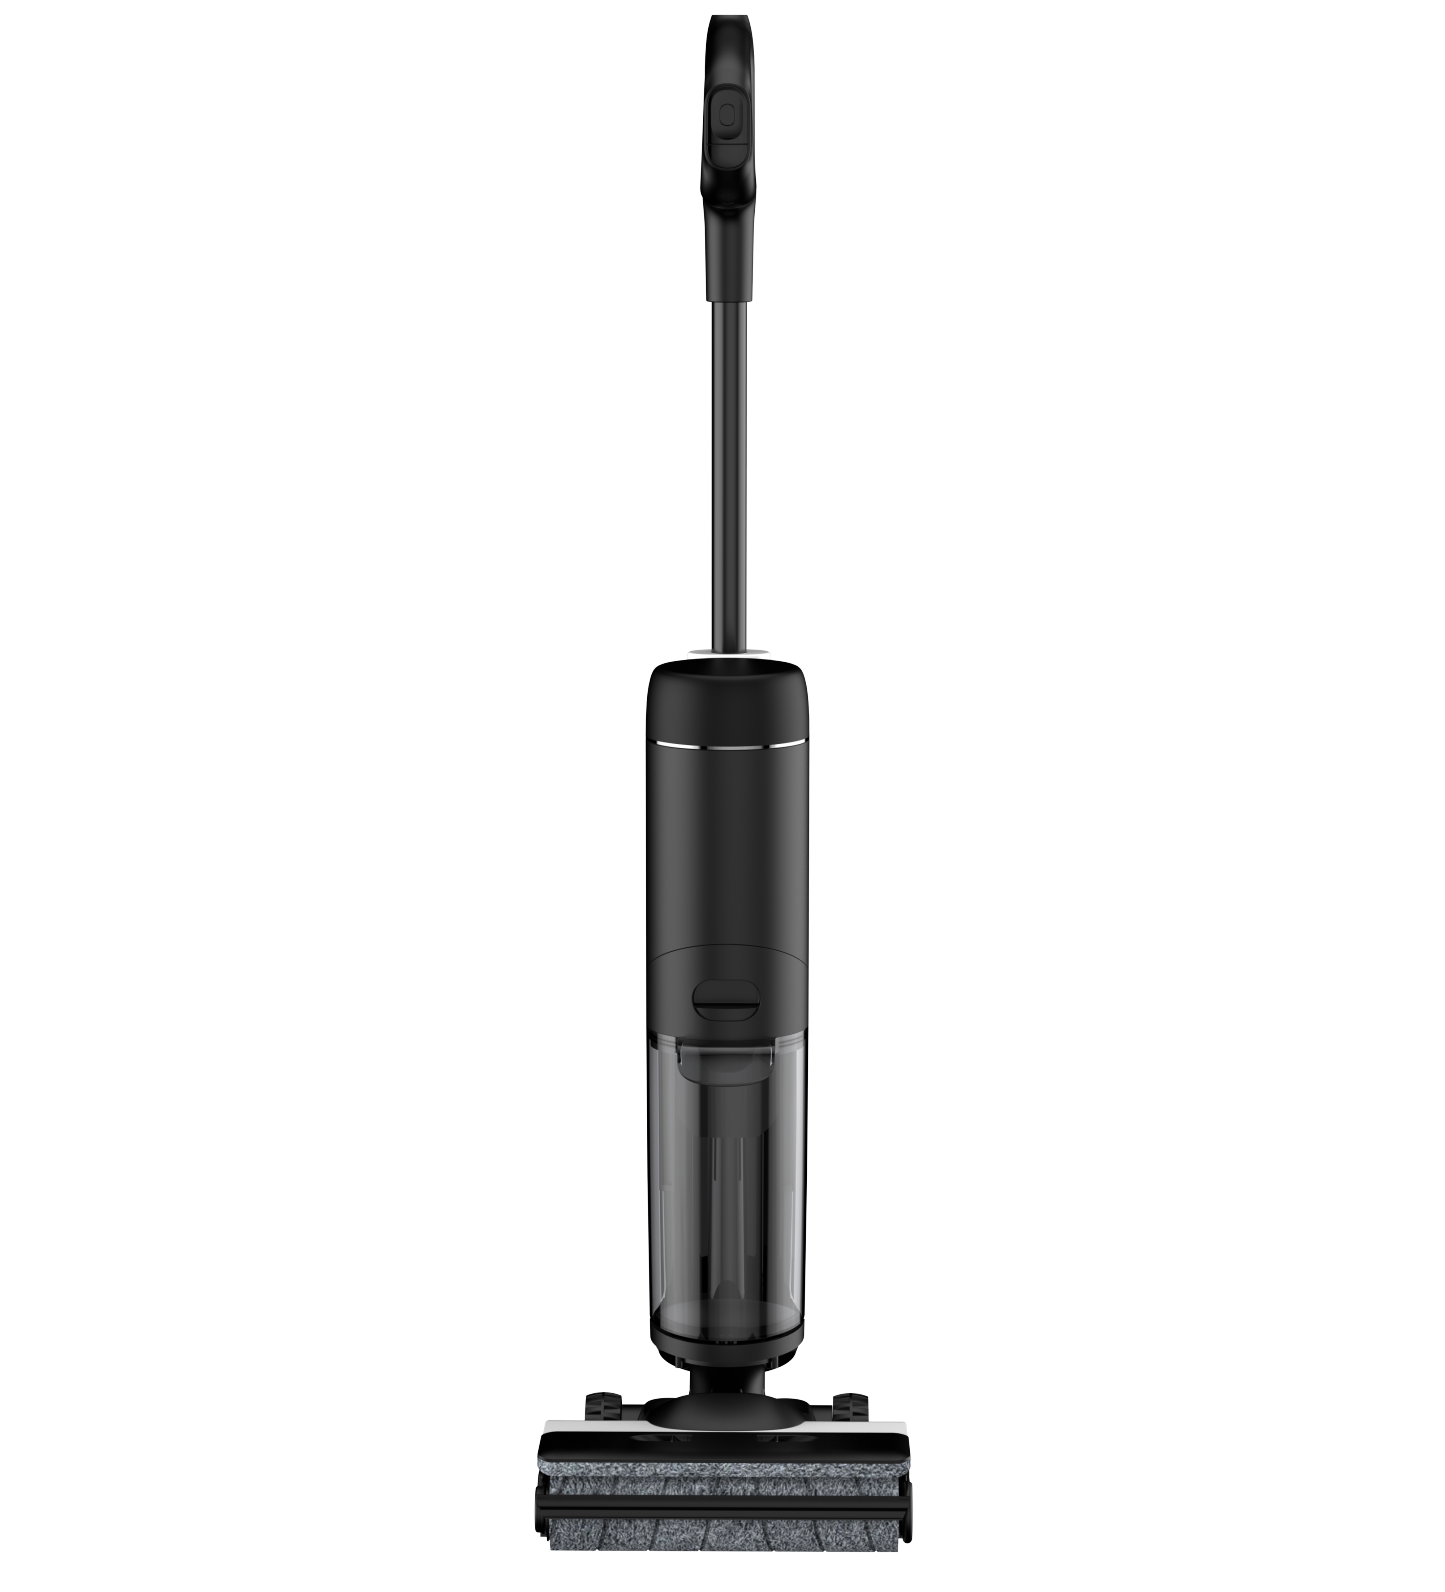 ZODA-002 floor washer vacuum cleaner Complete Wet Dry Vacuum Cordless Floor Cleaner and Mop One-Step Cleaning for Hard Floors